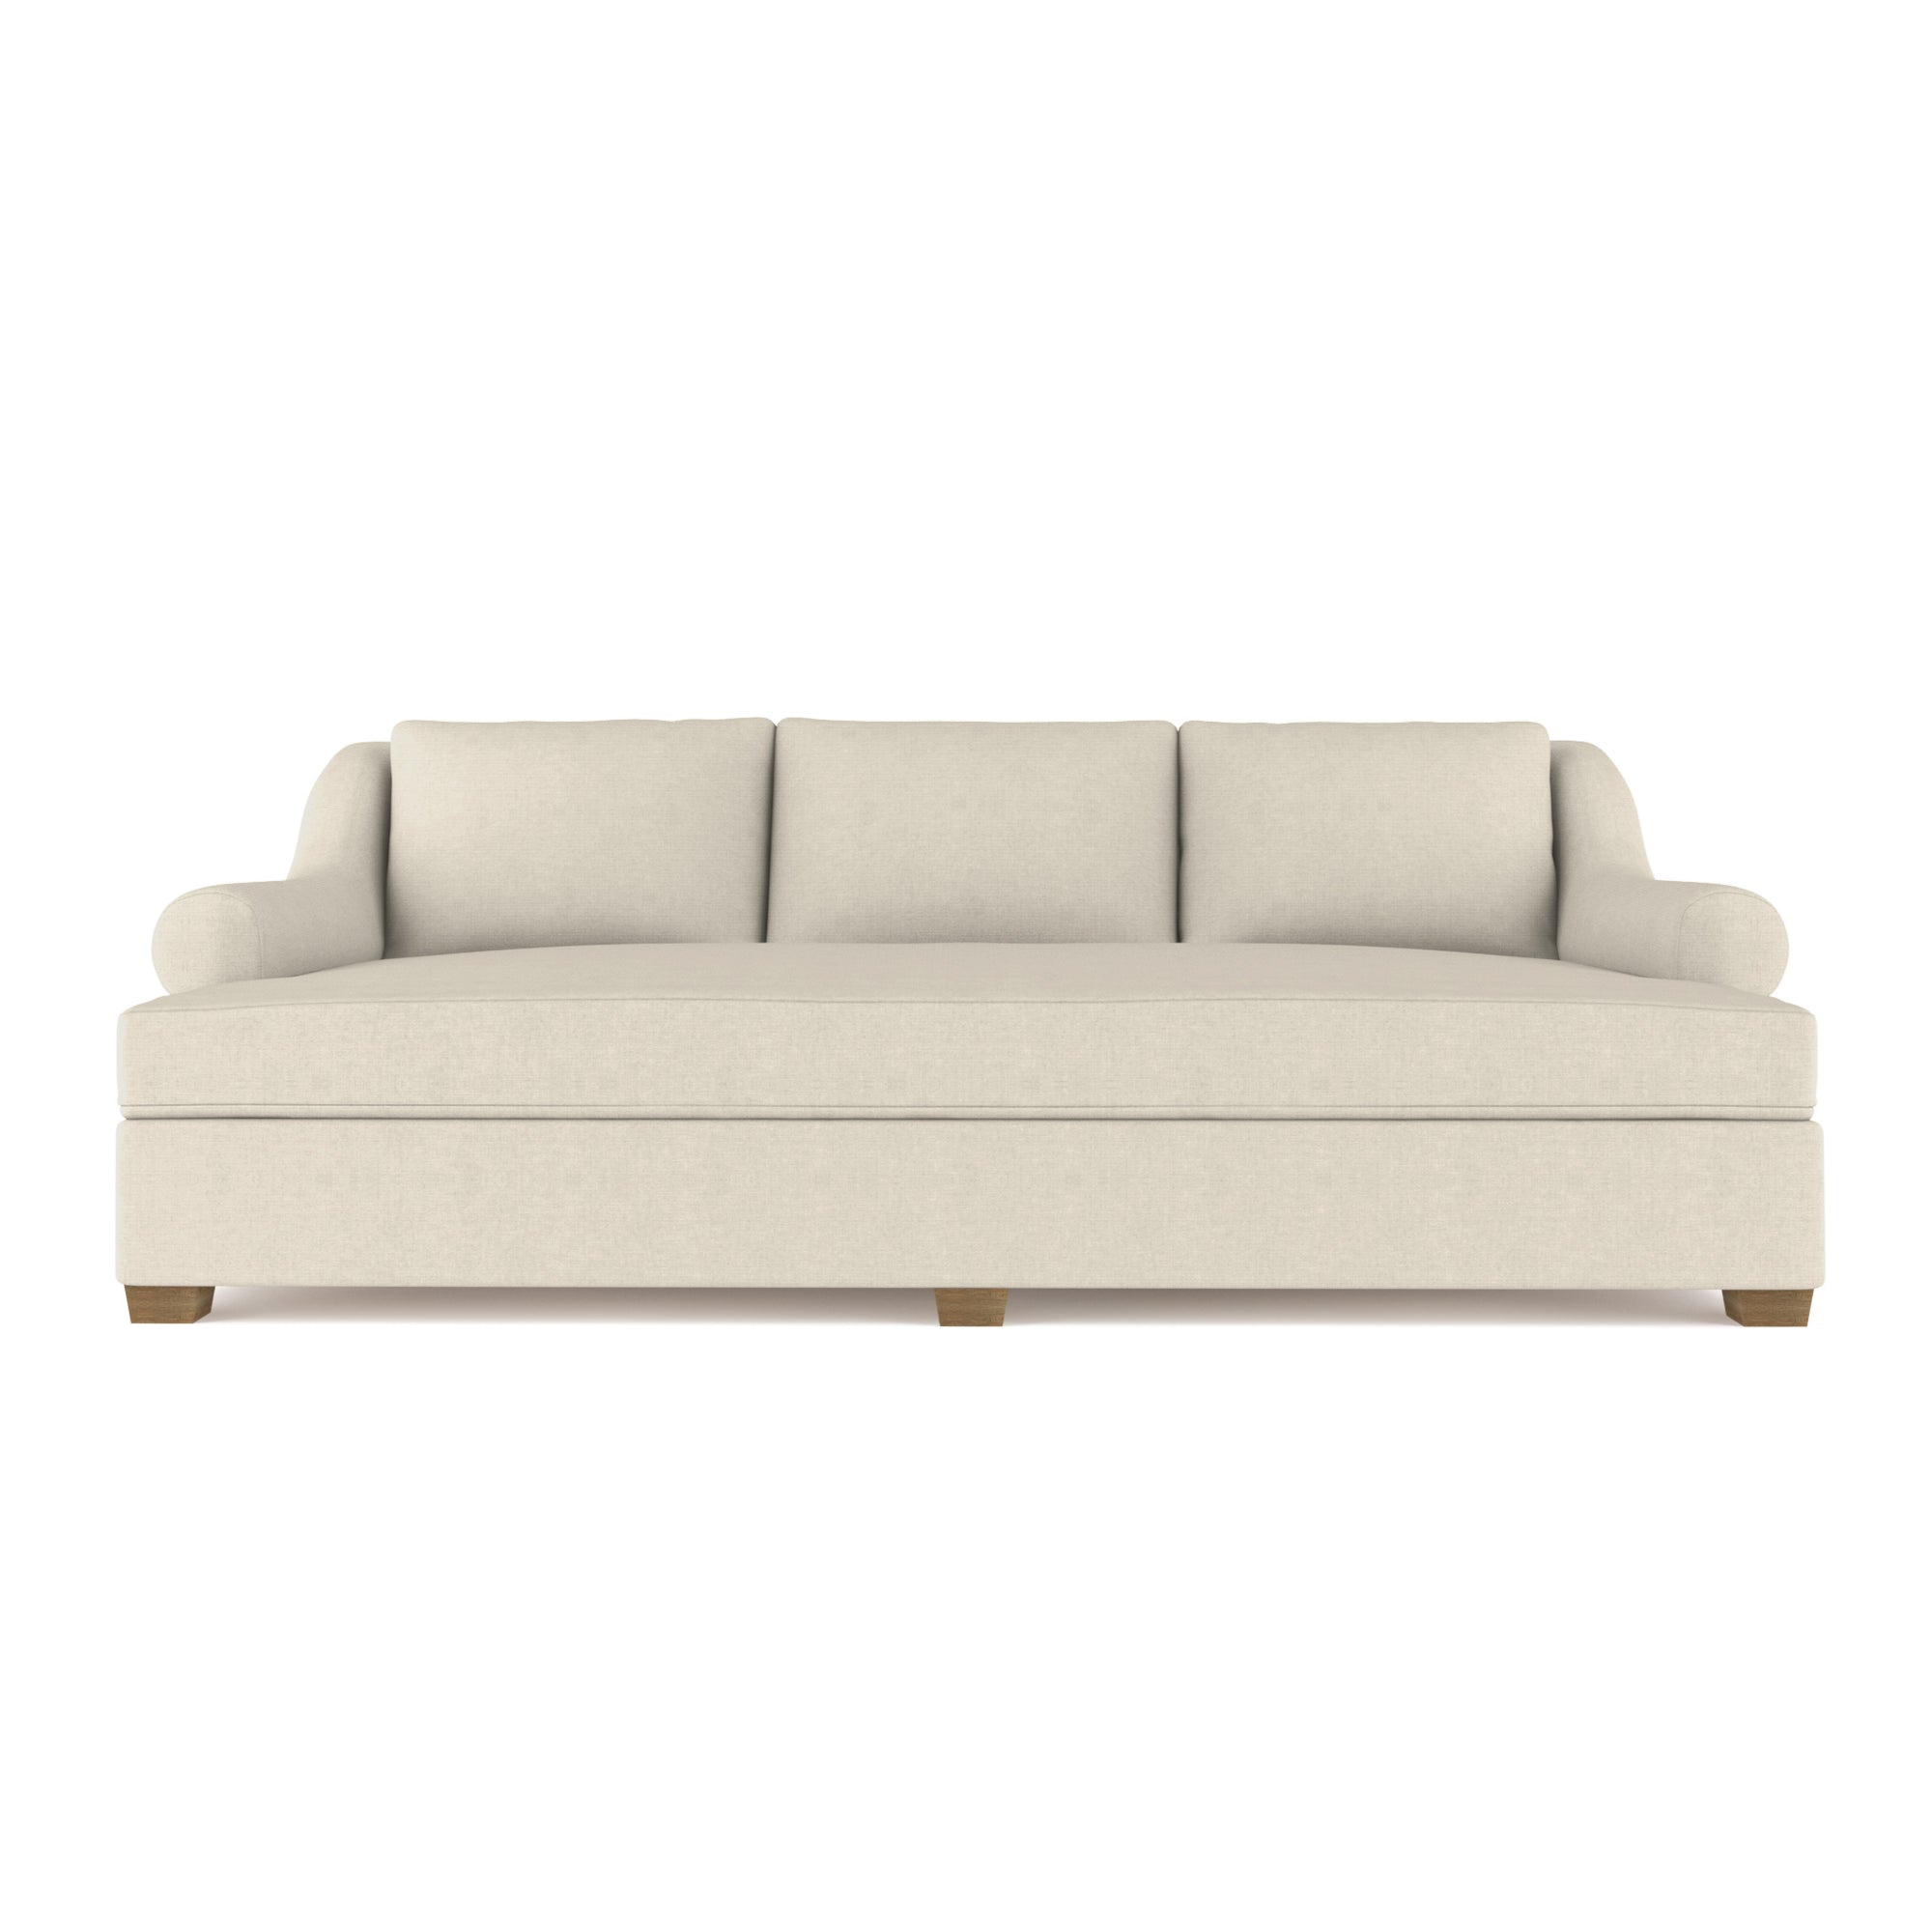 Thompson Daybed - Oyster Box Weave Linen